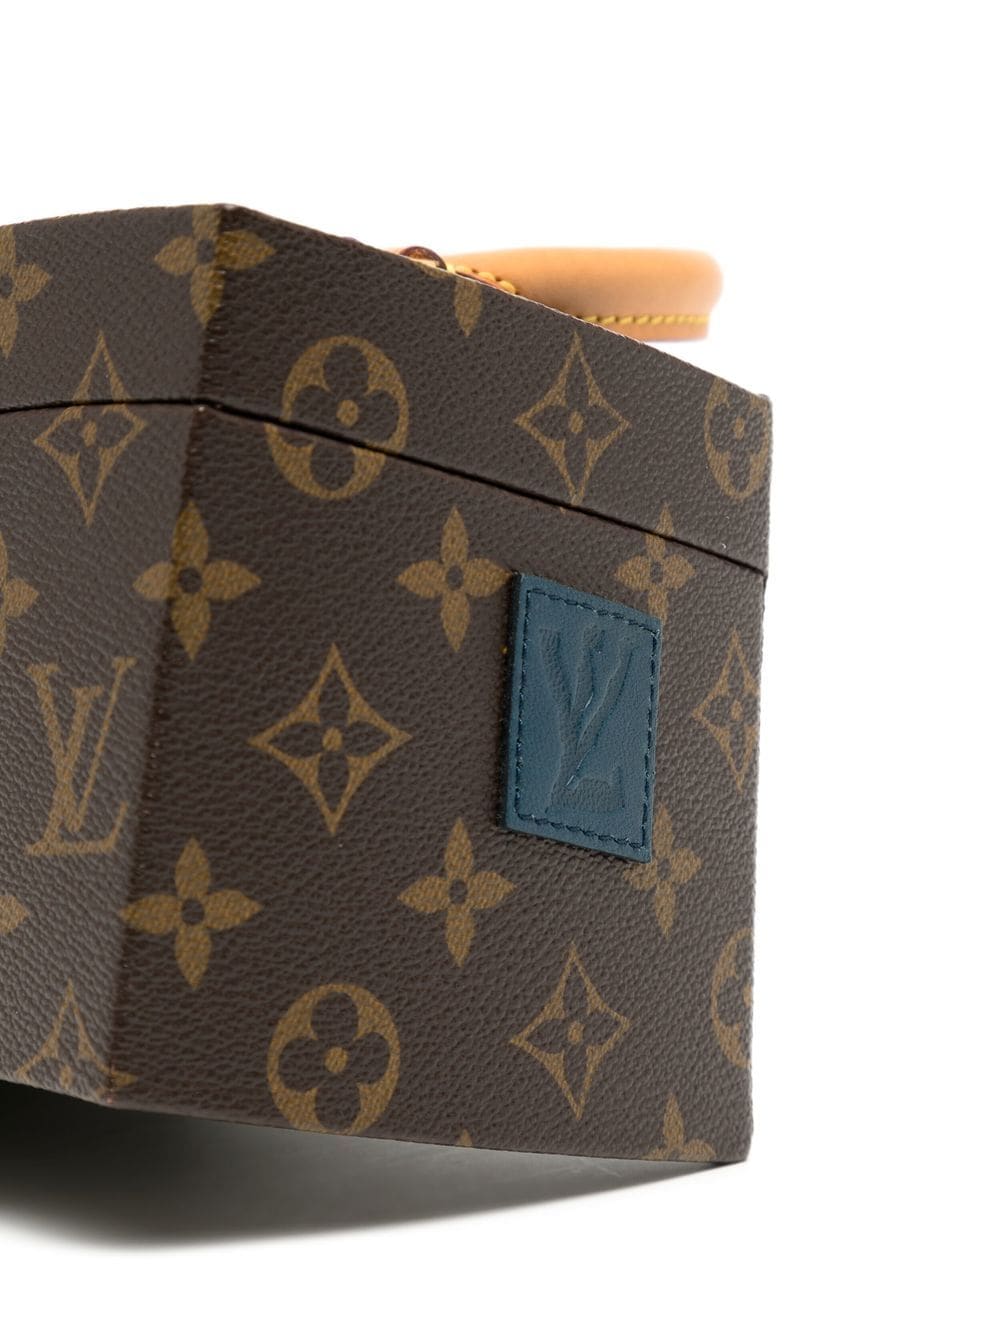 Louis Vuitton x Frank Gehry 2014 pre-owned Twisted Box Bag - Farfetch